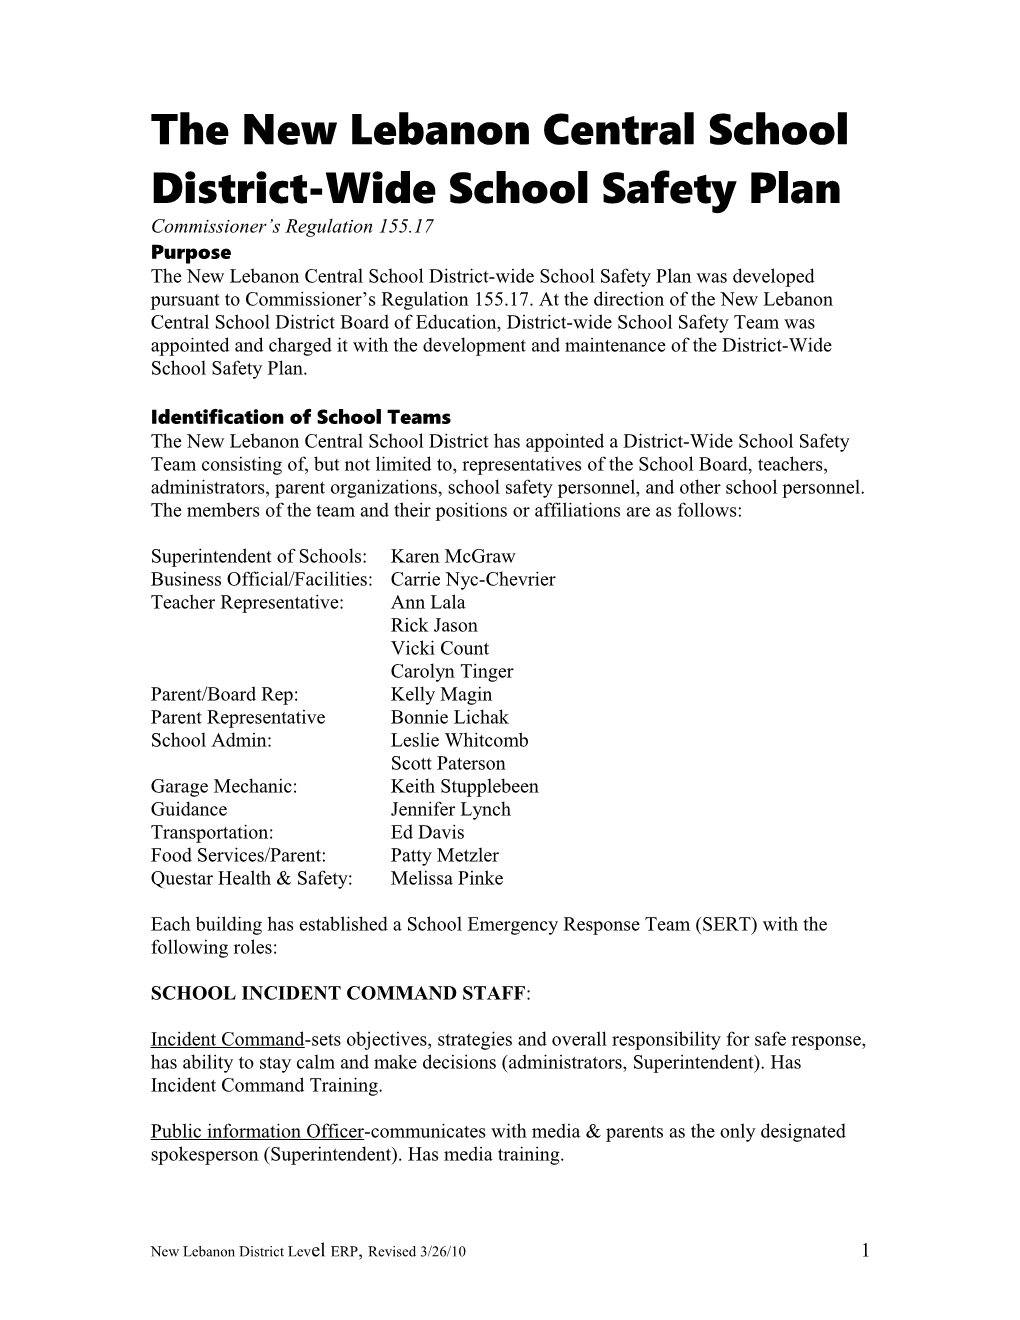 The New Lebanoncentralschooldistrict-Wideschool Safety Plan